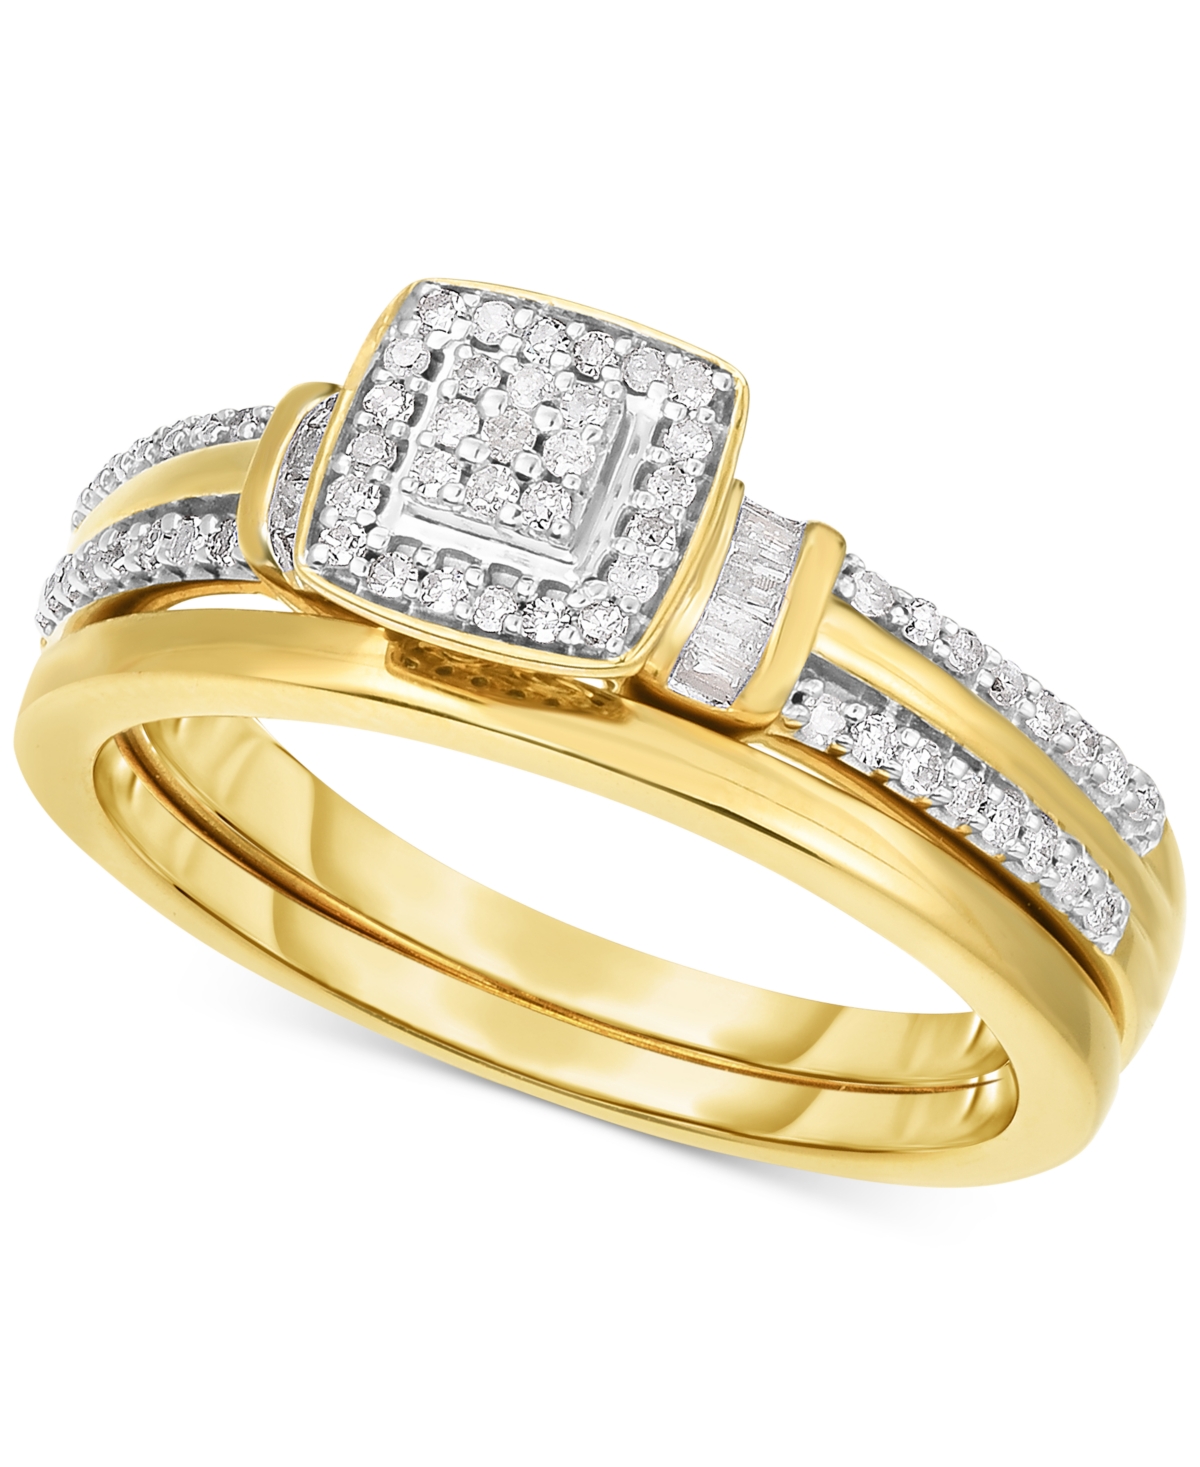 Diamond Square Cluster Ring (1/4 ct. t.w.) in 14k Gold-Plated Sterling Silver or Sterling Silver - Sterling Silver